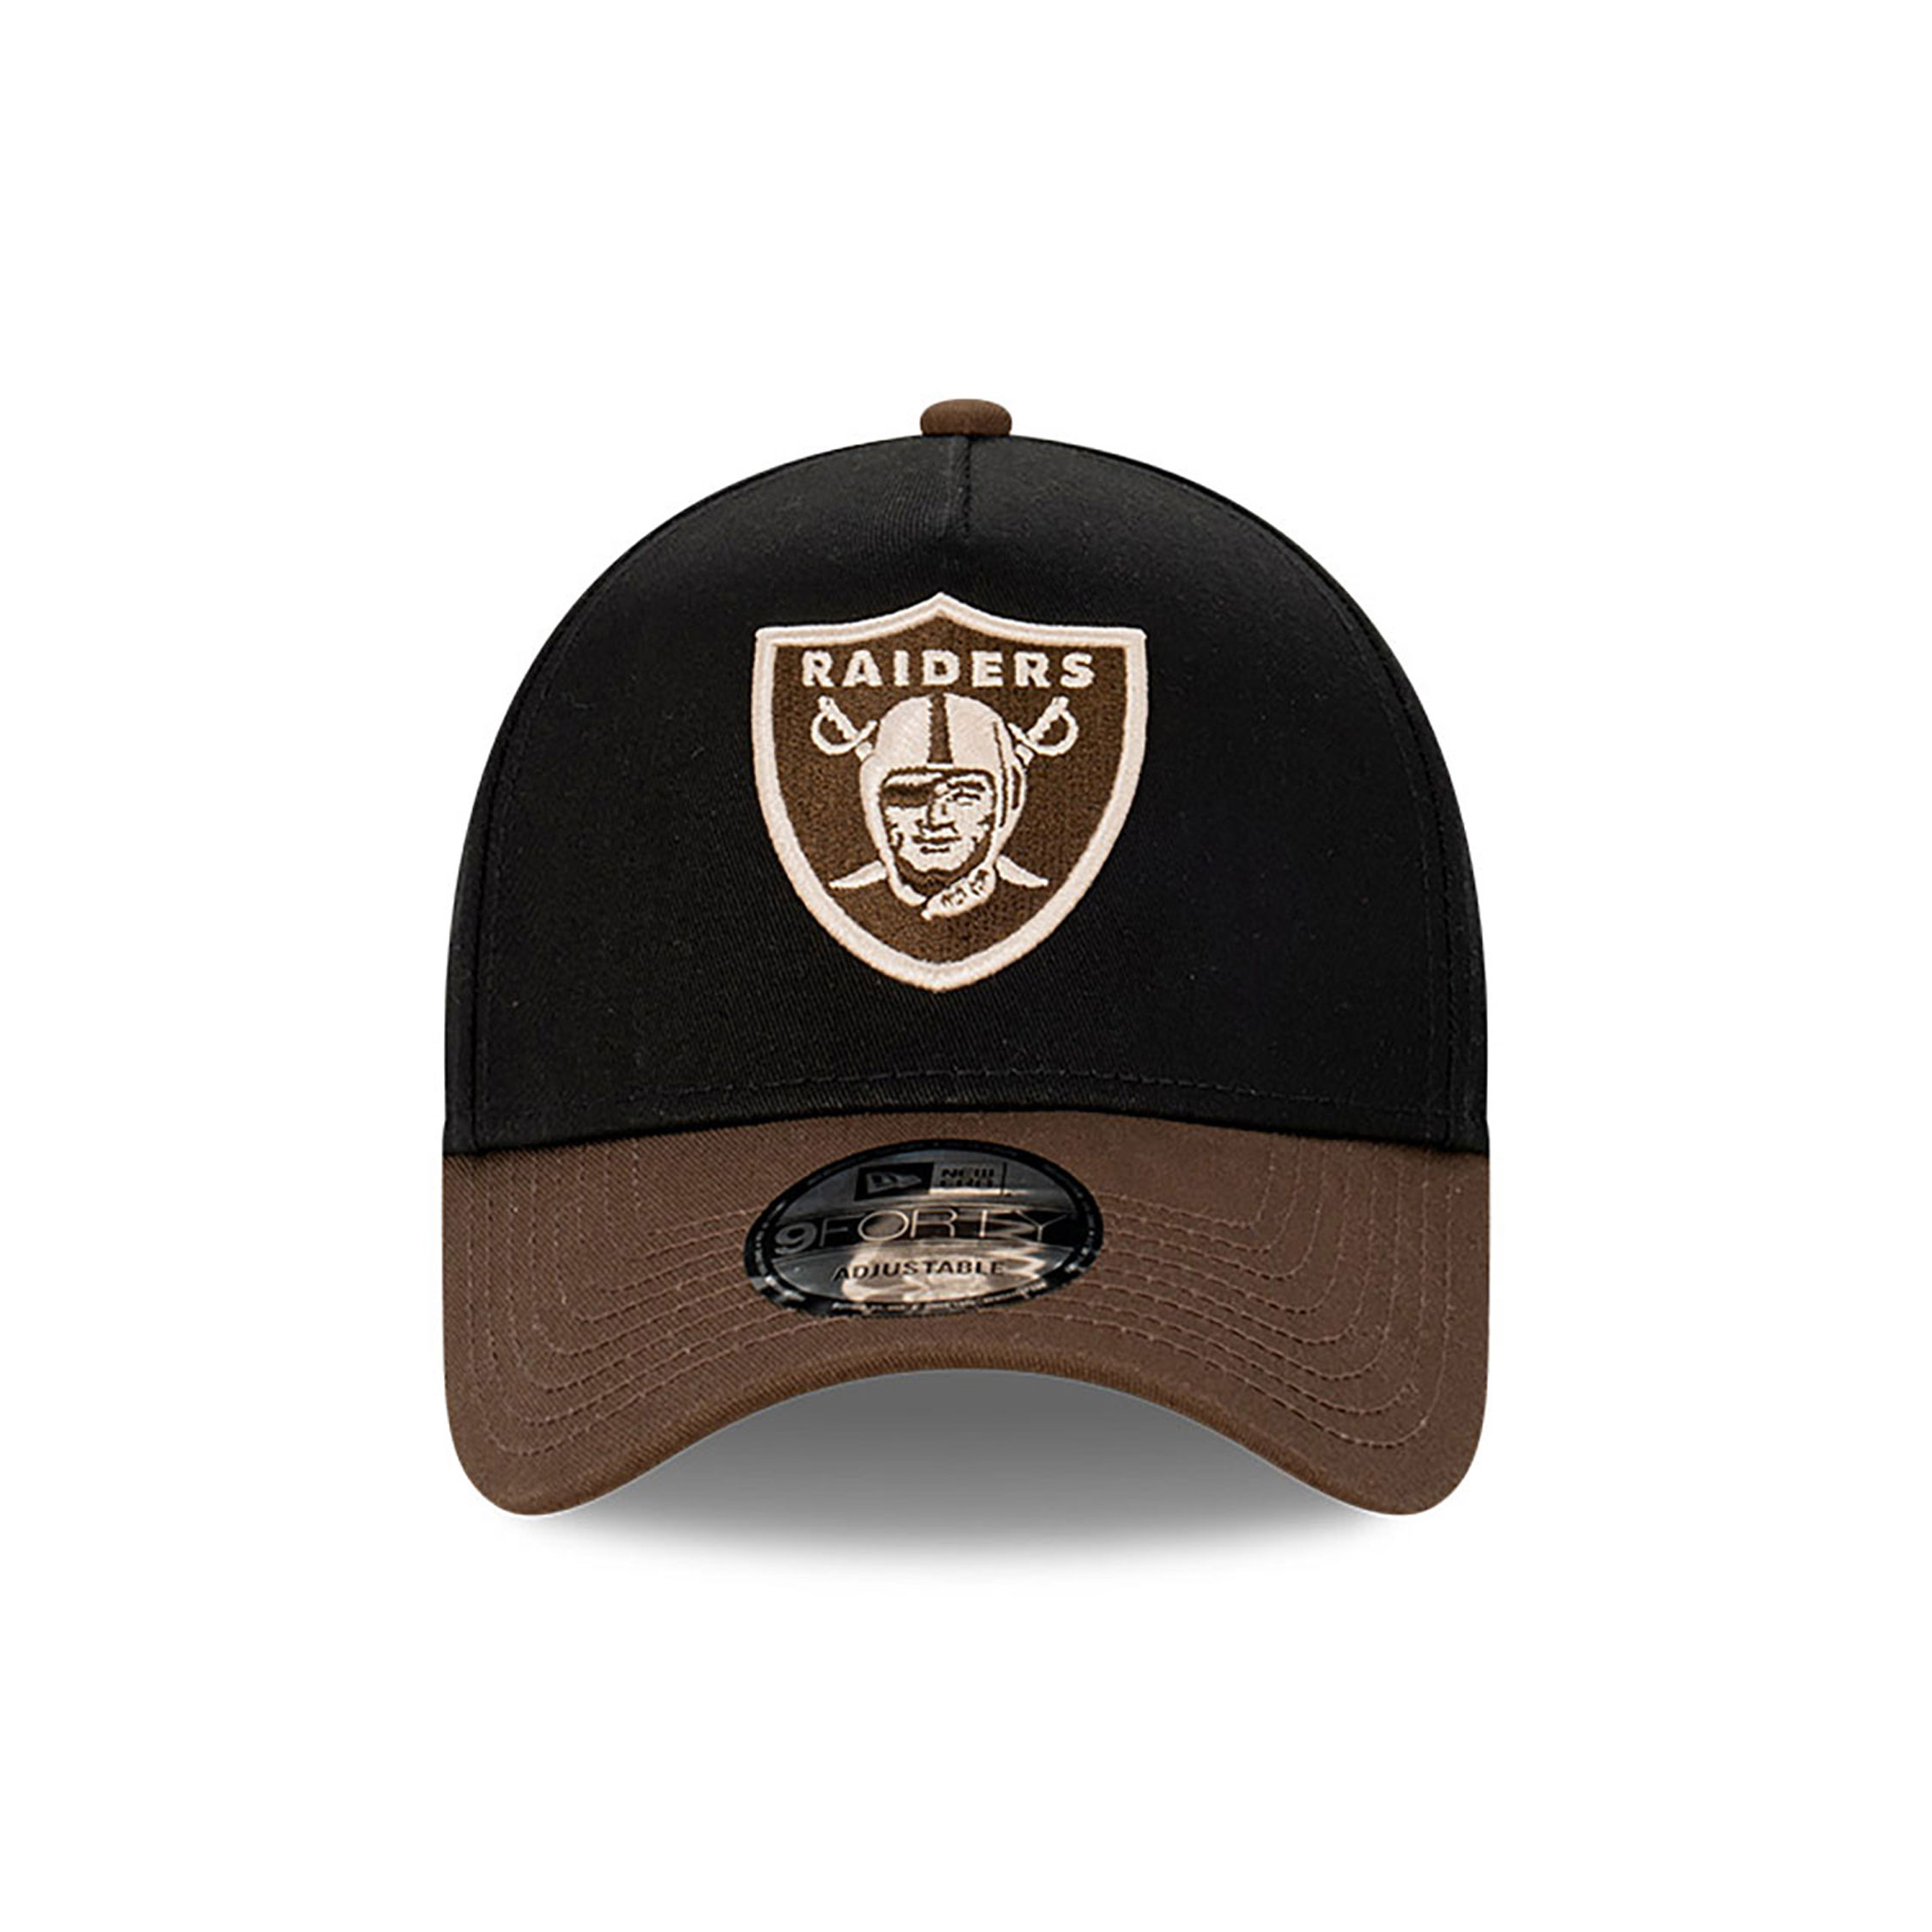 Las Vegas Raiders Grizzly Black 9FORTY A-Frame Adjustable Cap